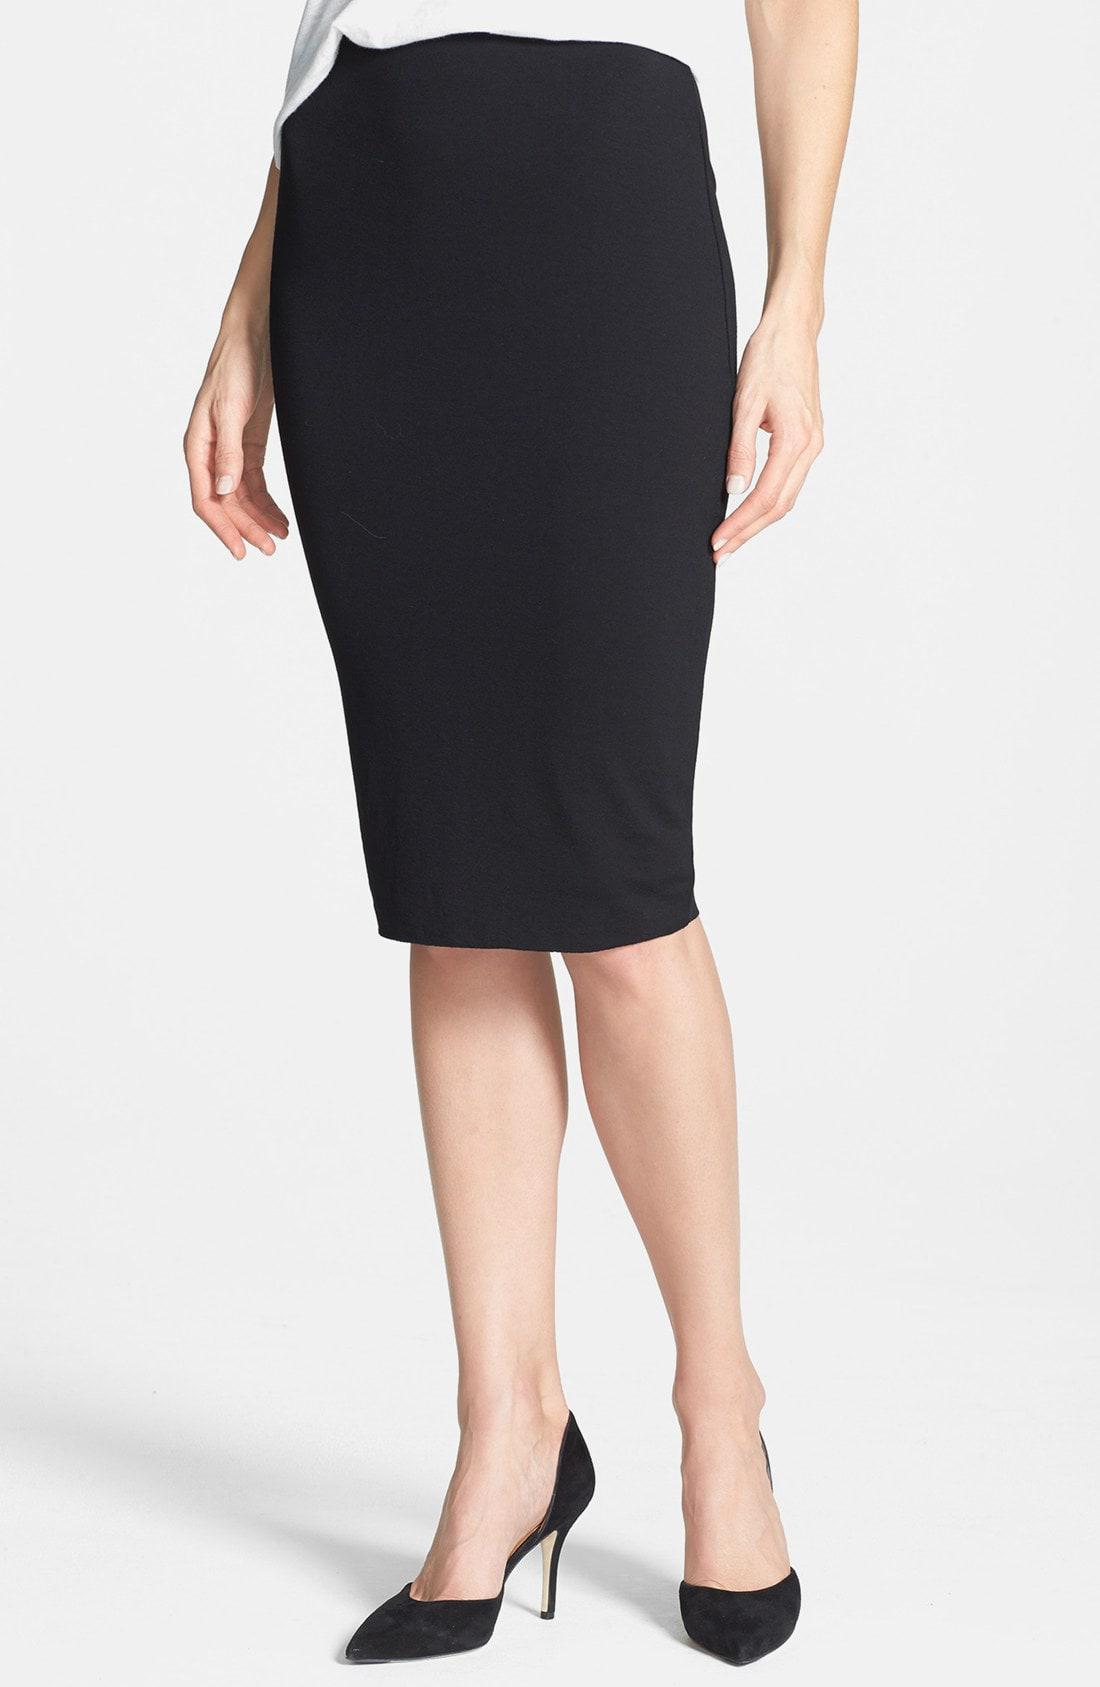 Vince Camuto Lace Stretch Knit Midi Tube Skirt in Black - Lyst